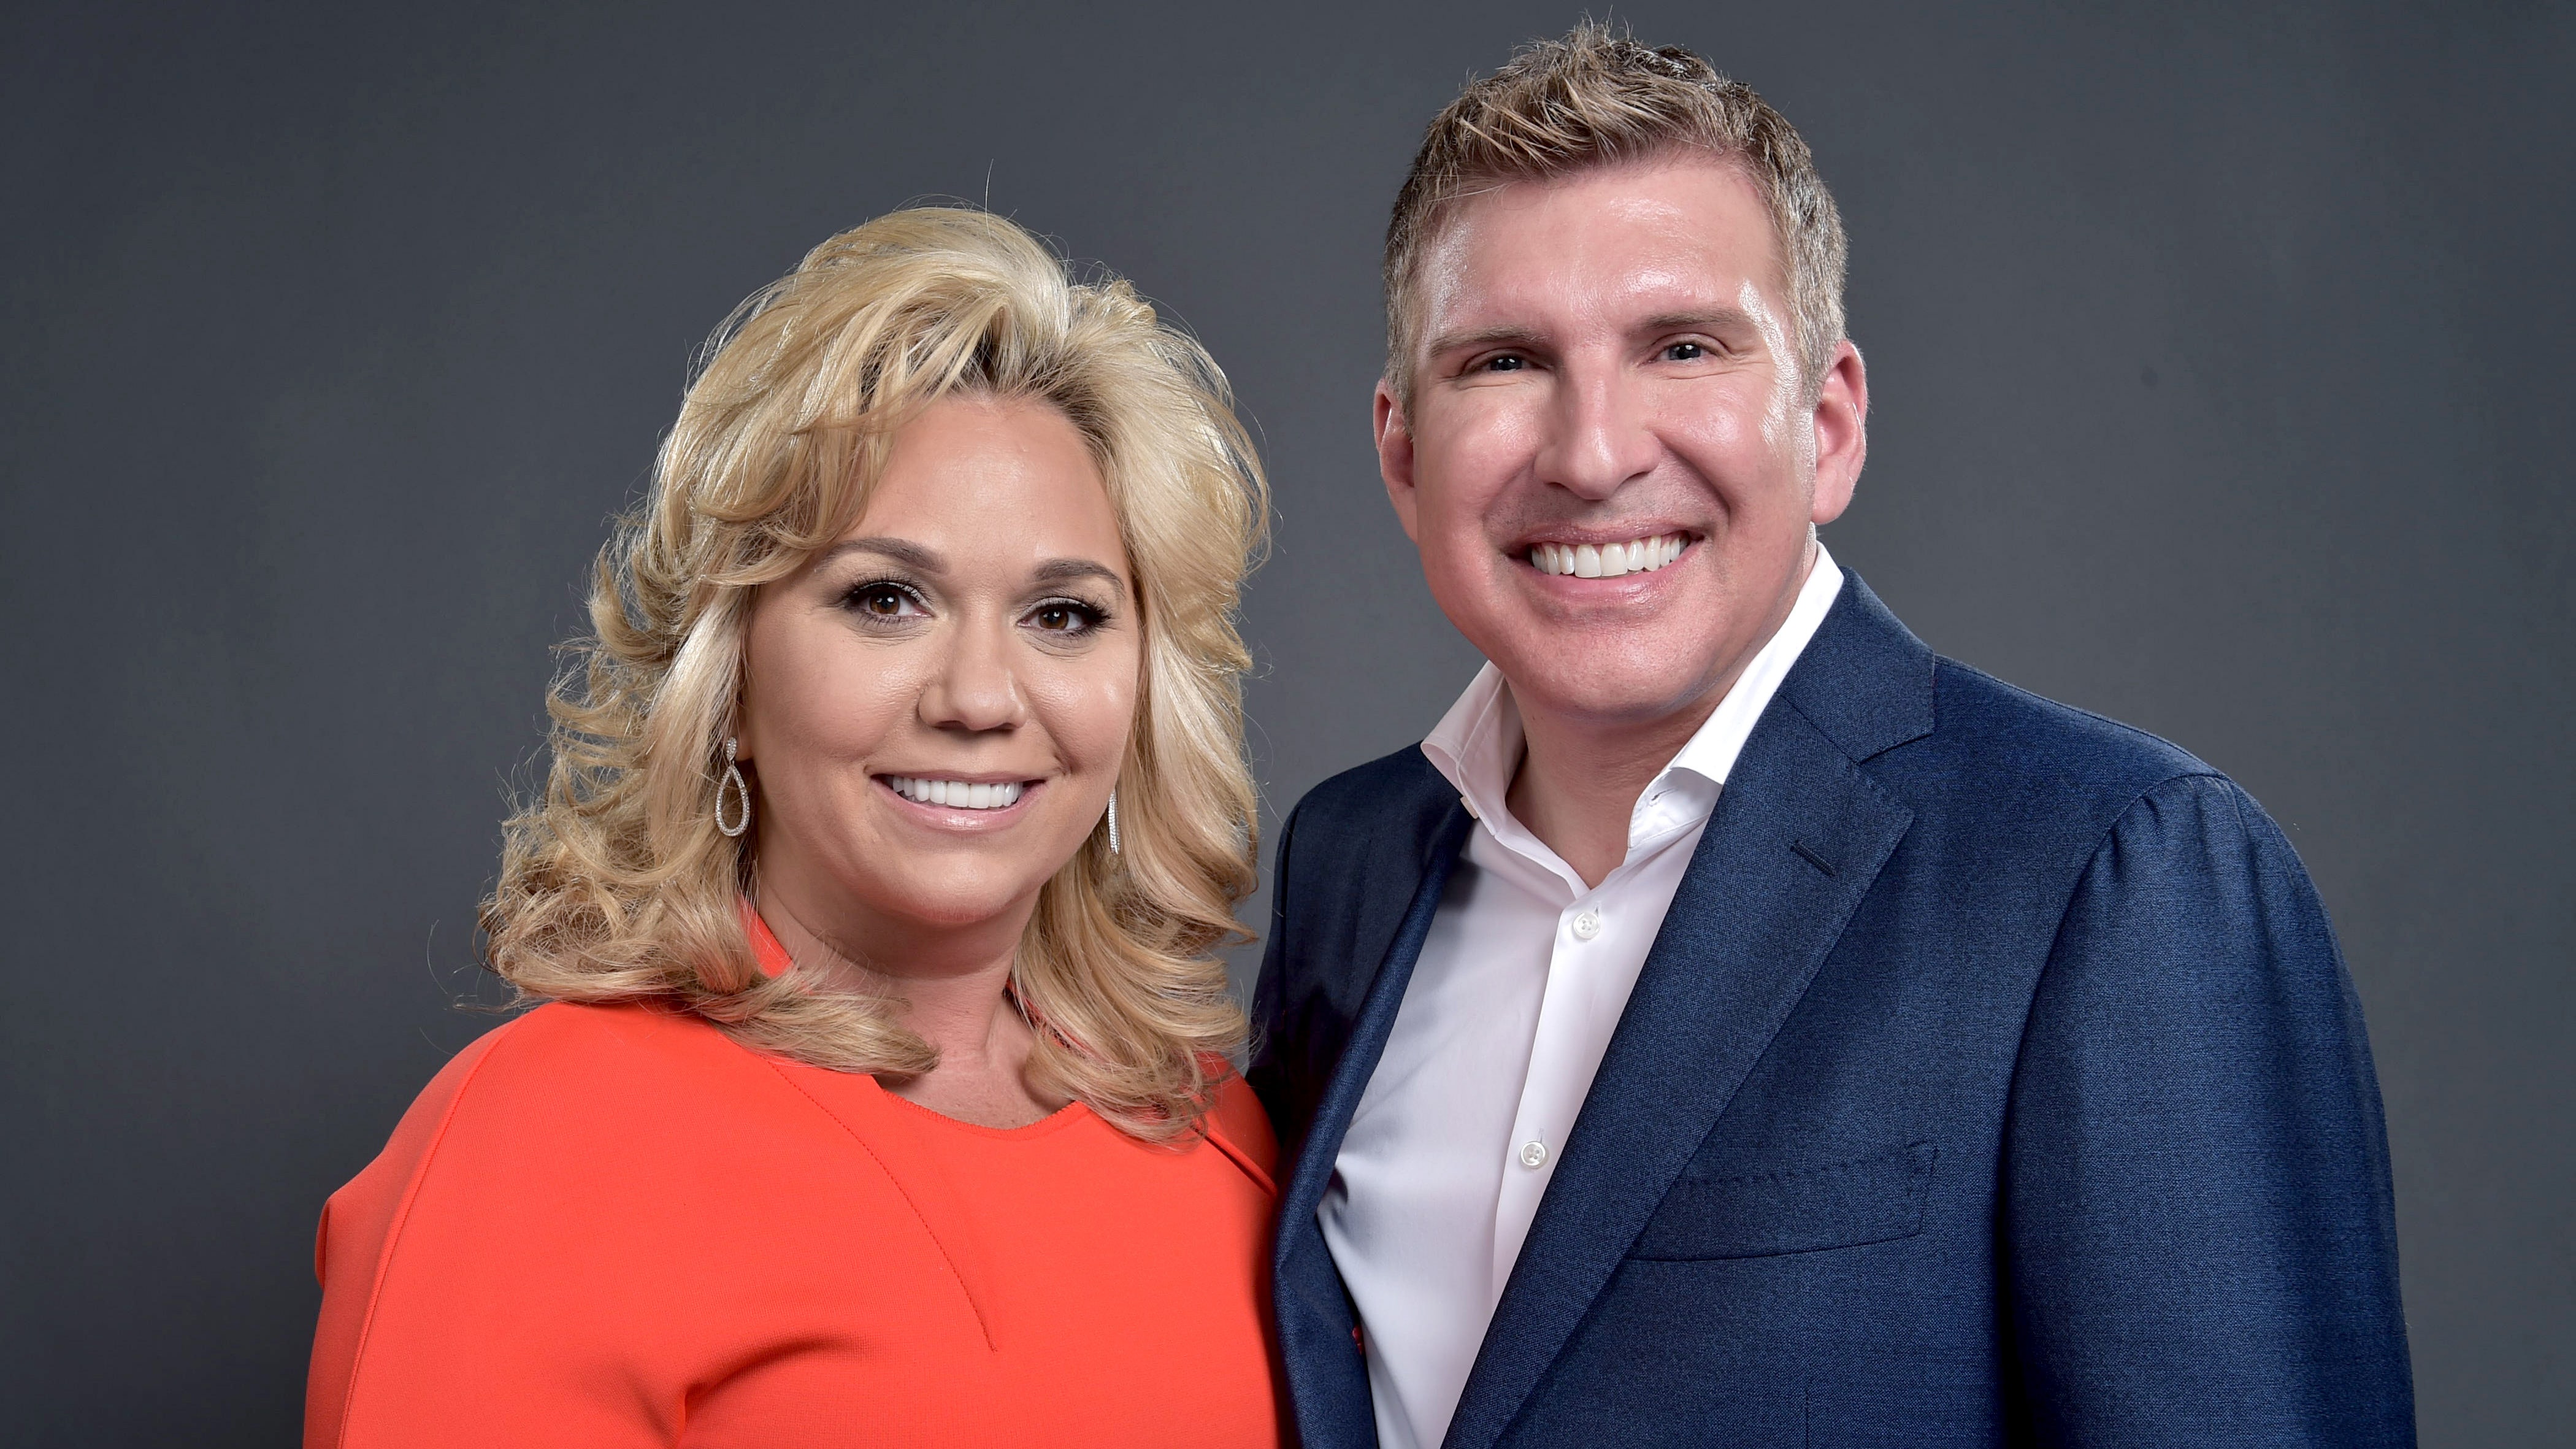 Todd and Julie Chrisley face poisonous snakes, mold and asbestos in prison, kids say: 'It's a nightmare'